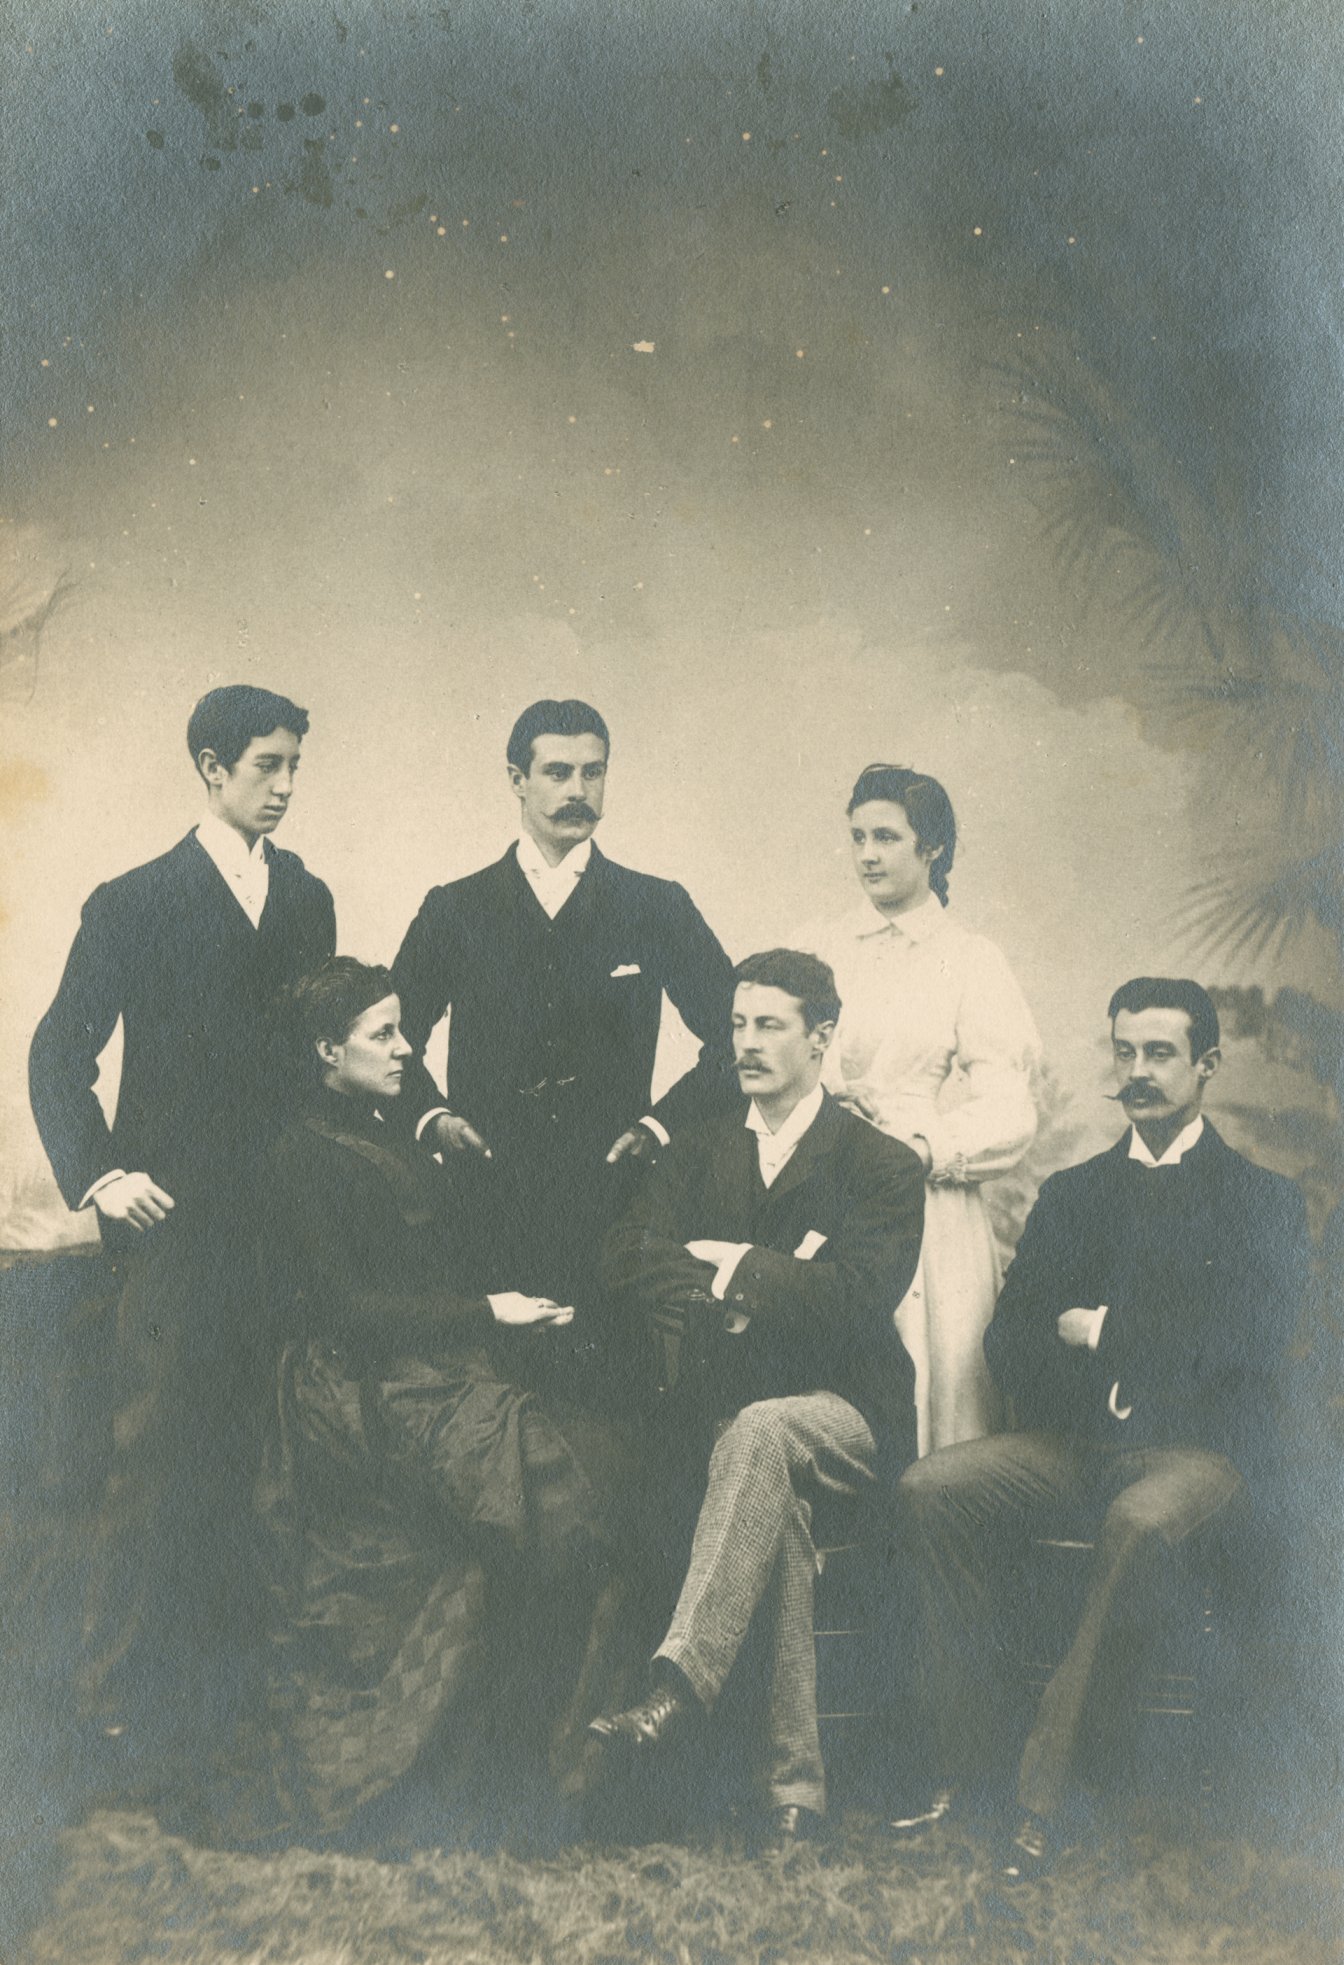 Black and white family photograph of four men and two women in period dress